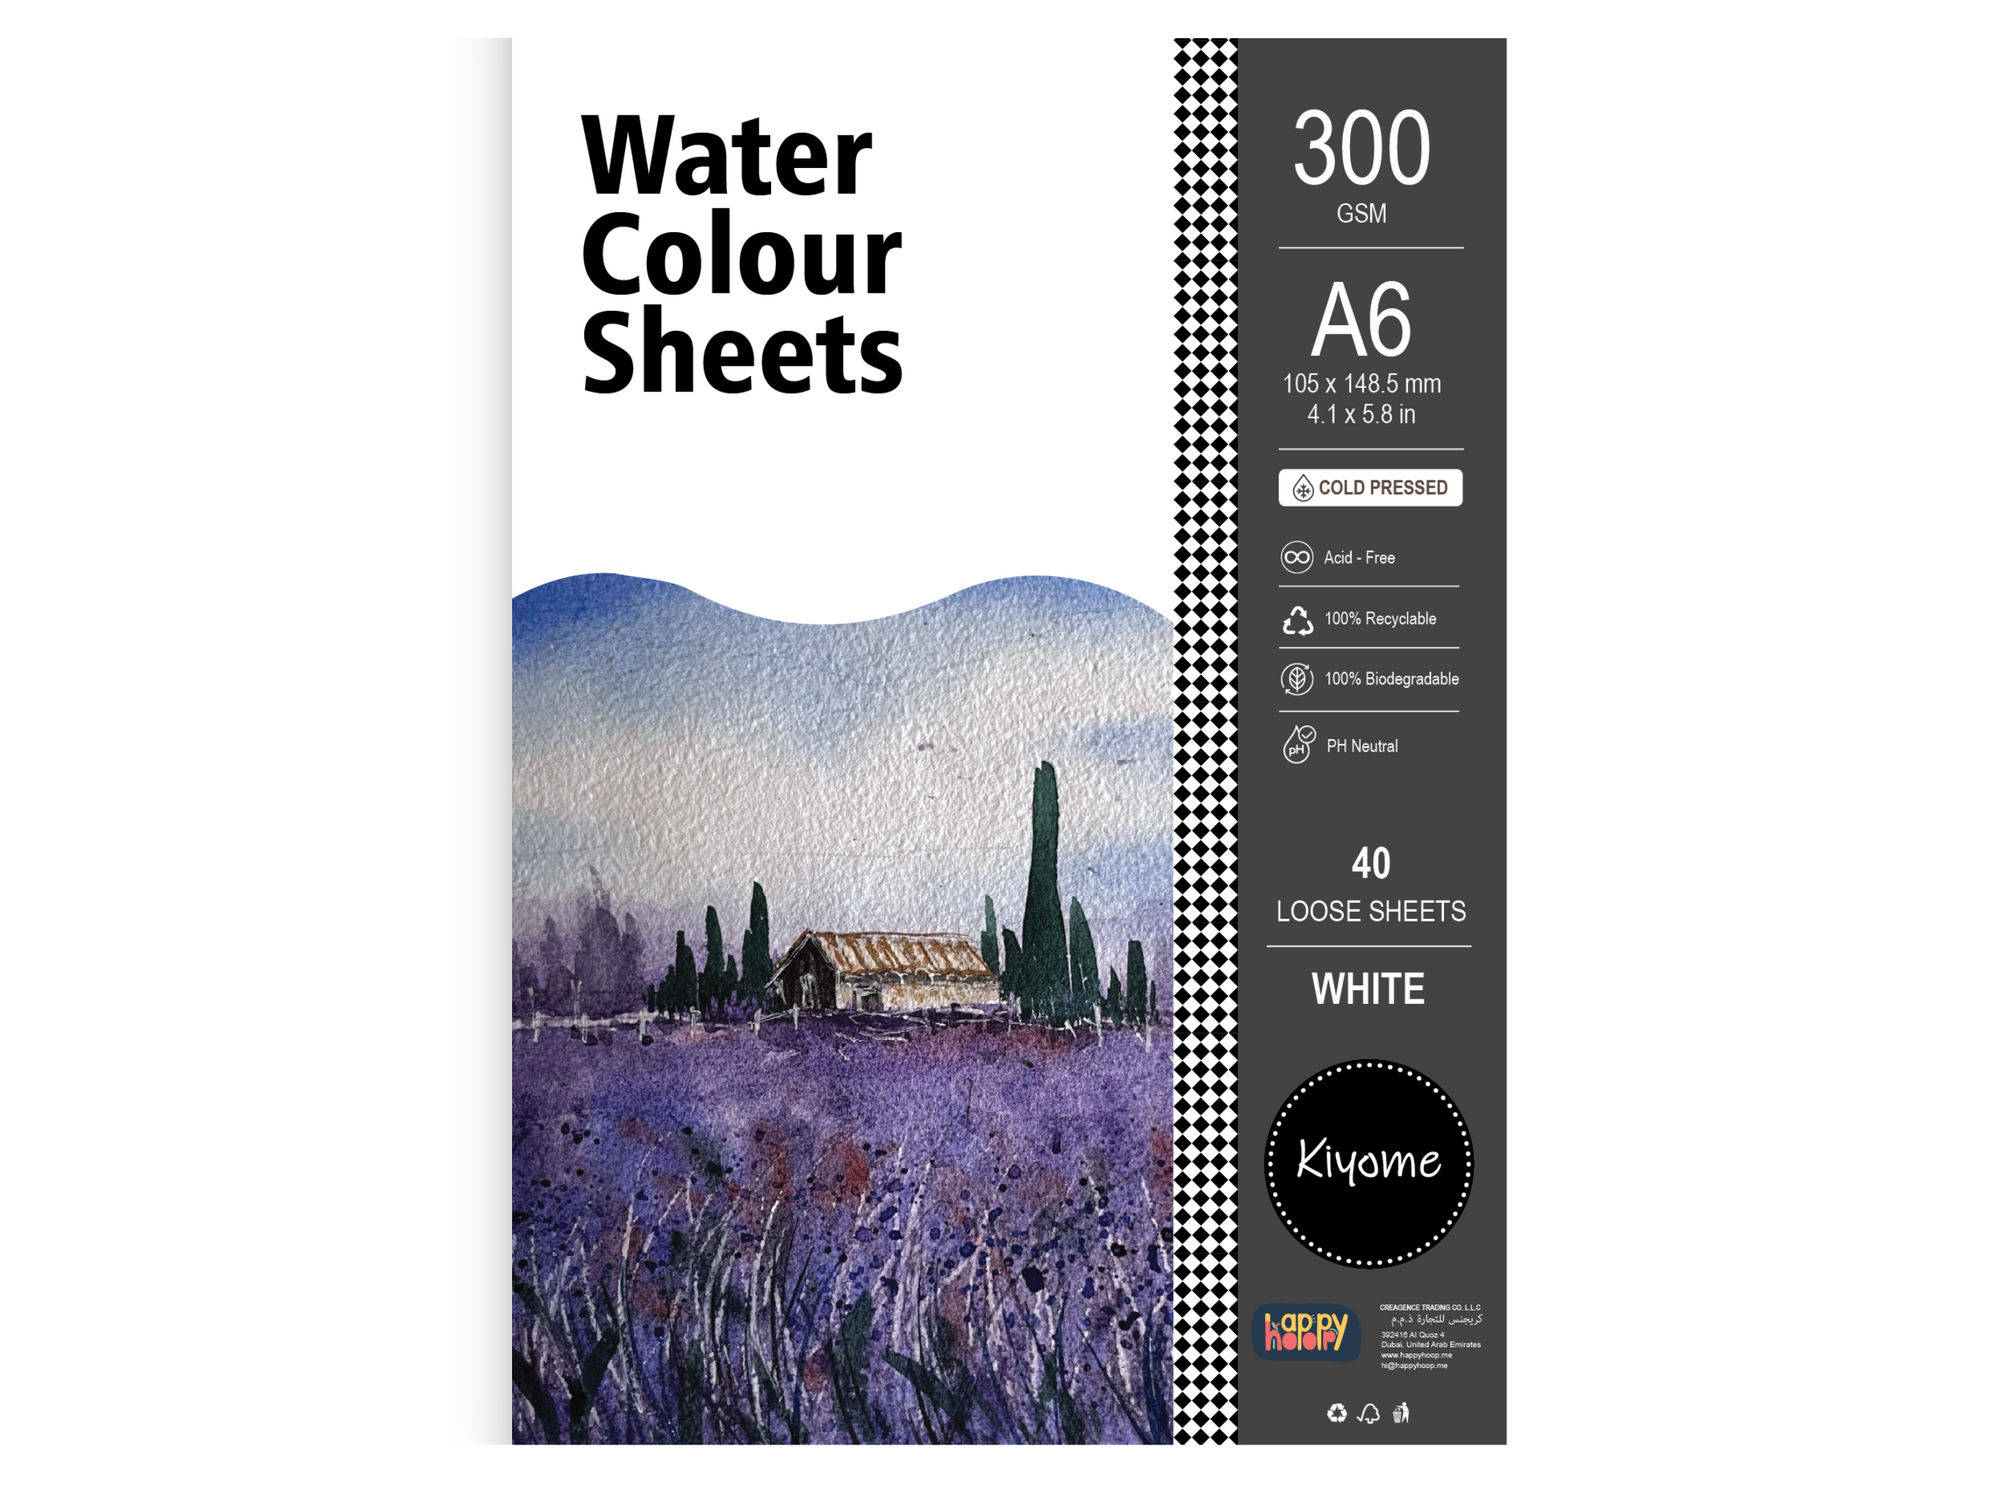 Kiyome Watercolour Sheets | Cold Pressed | 300 GSM | A4 | 10 Sheets